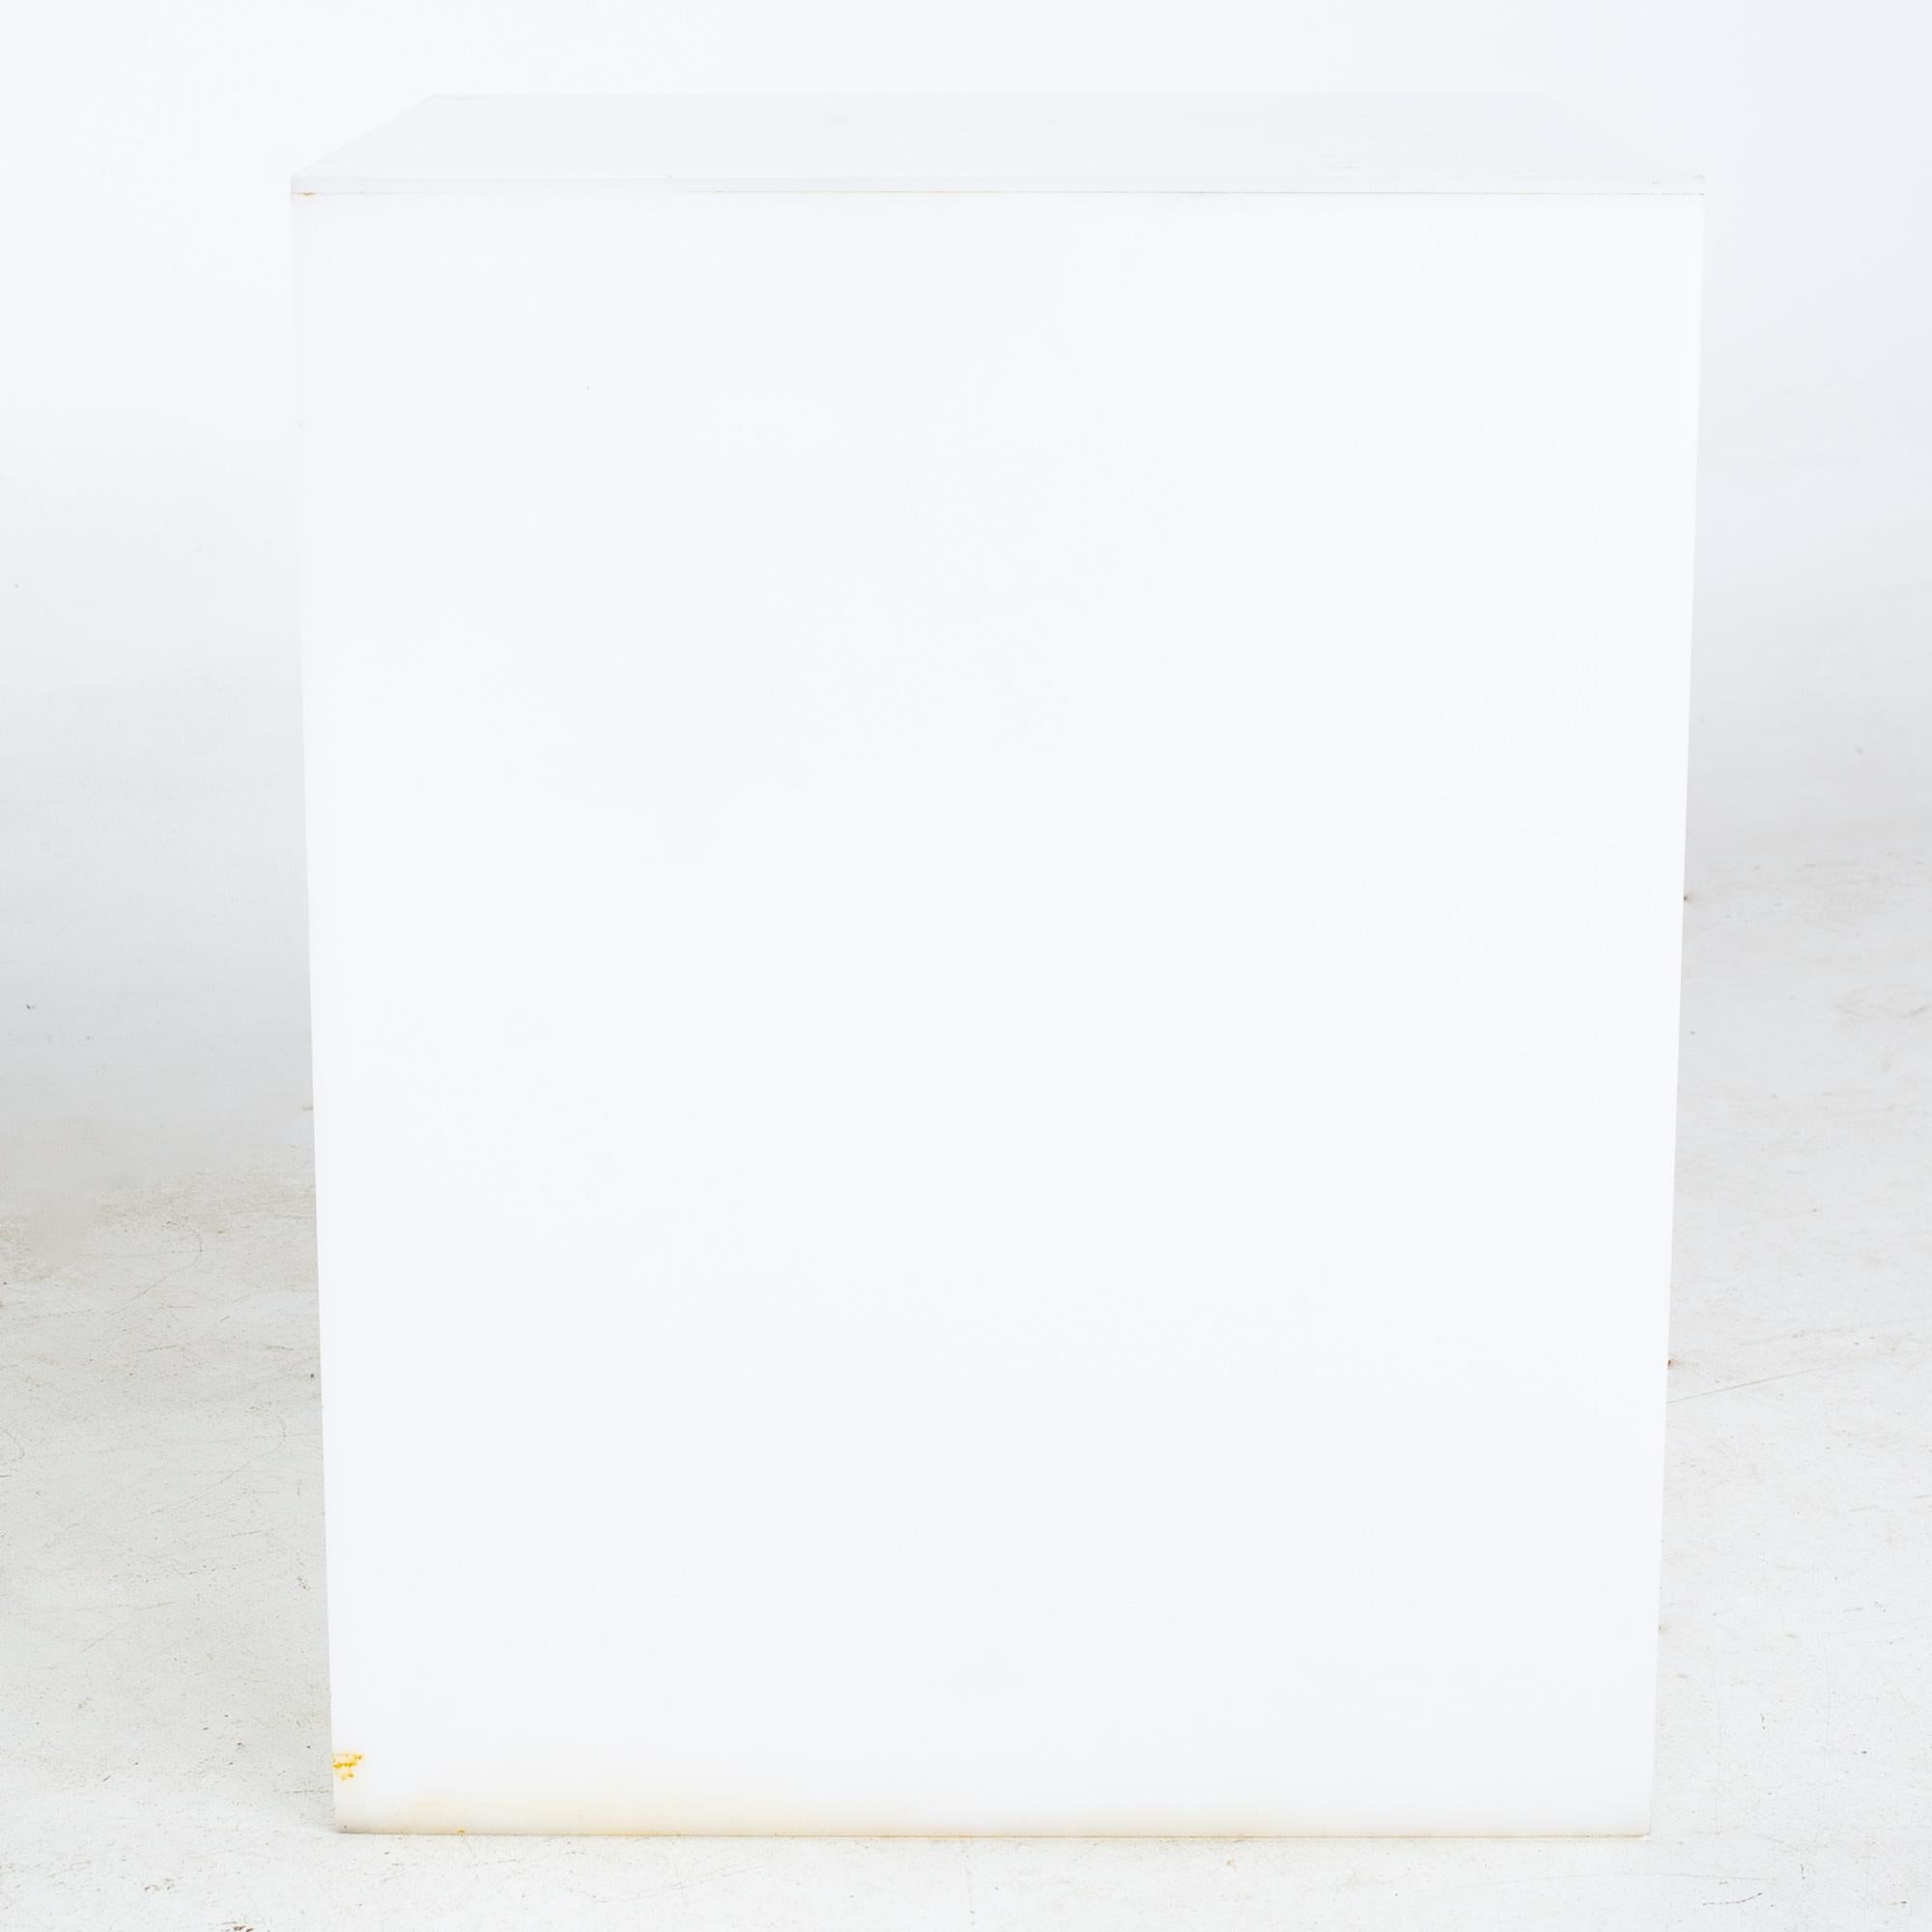 Mid Century Frosted Acrylic Cube Side End Table

End table measures: 20 wide x 20 deep x 25 inches high

All pieces of furniture can be had in what we call restored vintage condition. That means the piece is restored upon purchase so it’s free